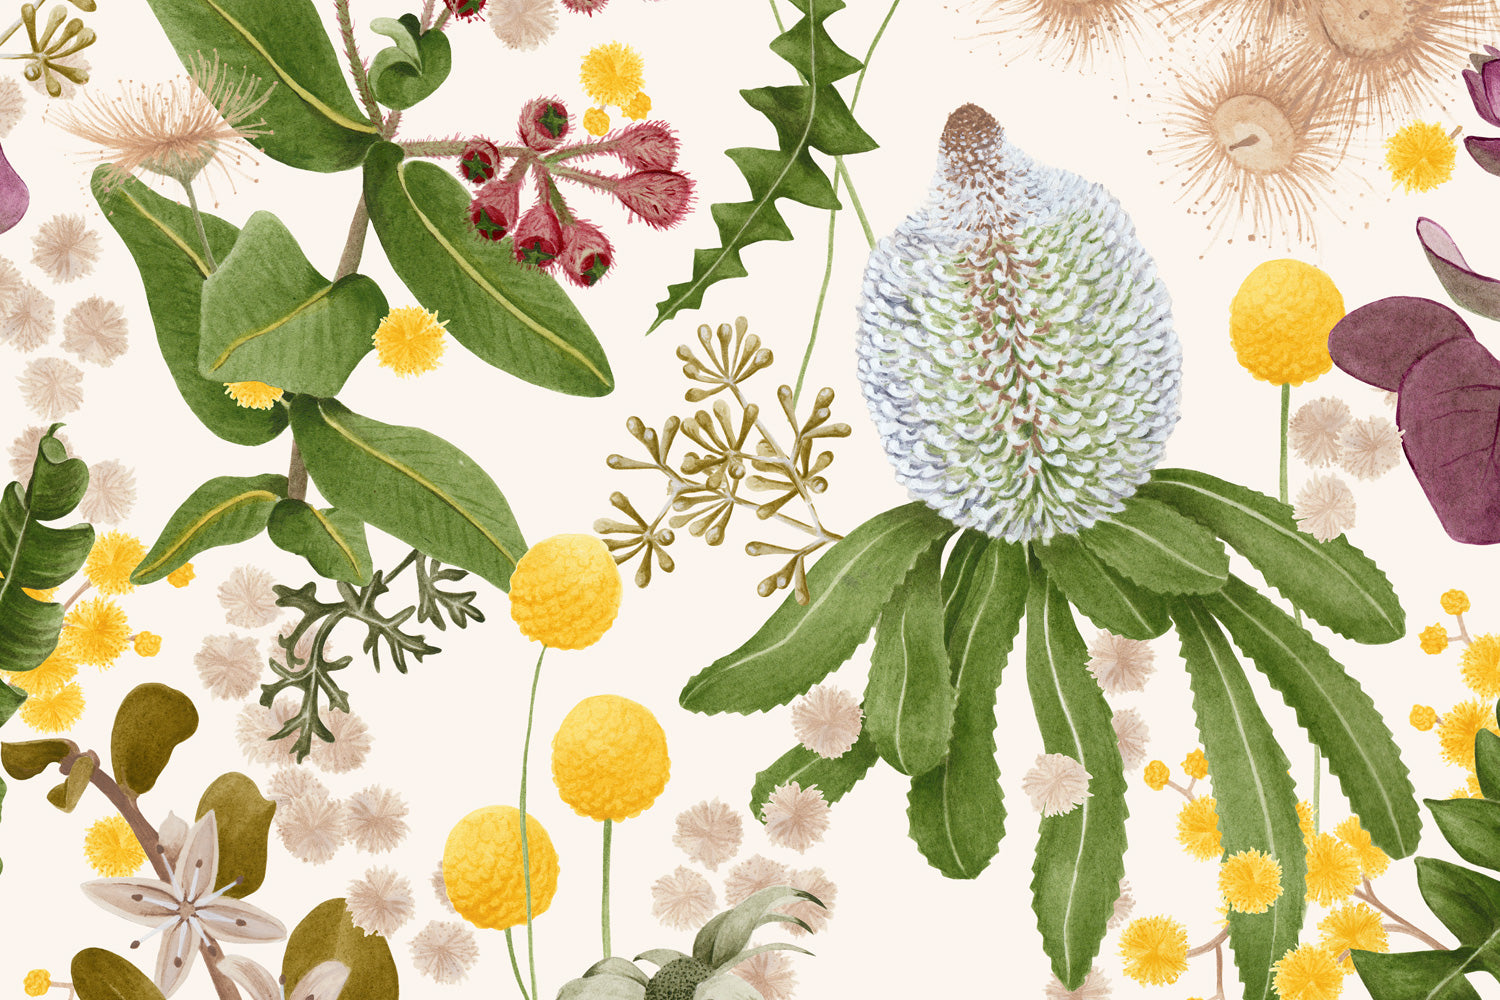 Detail of wallpaper in a large-scale botanical print in shades of pink, yellow and green on a cream field.